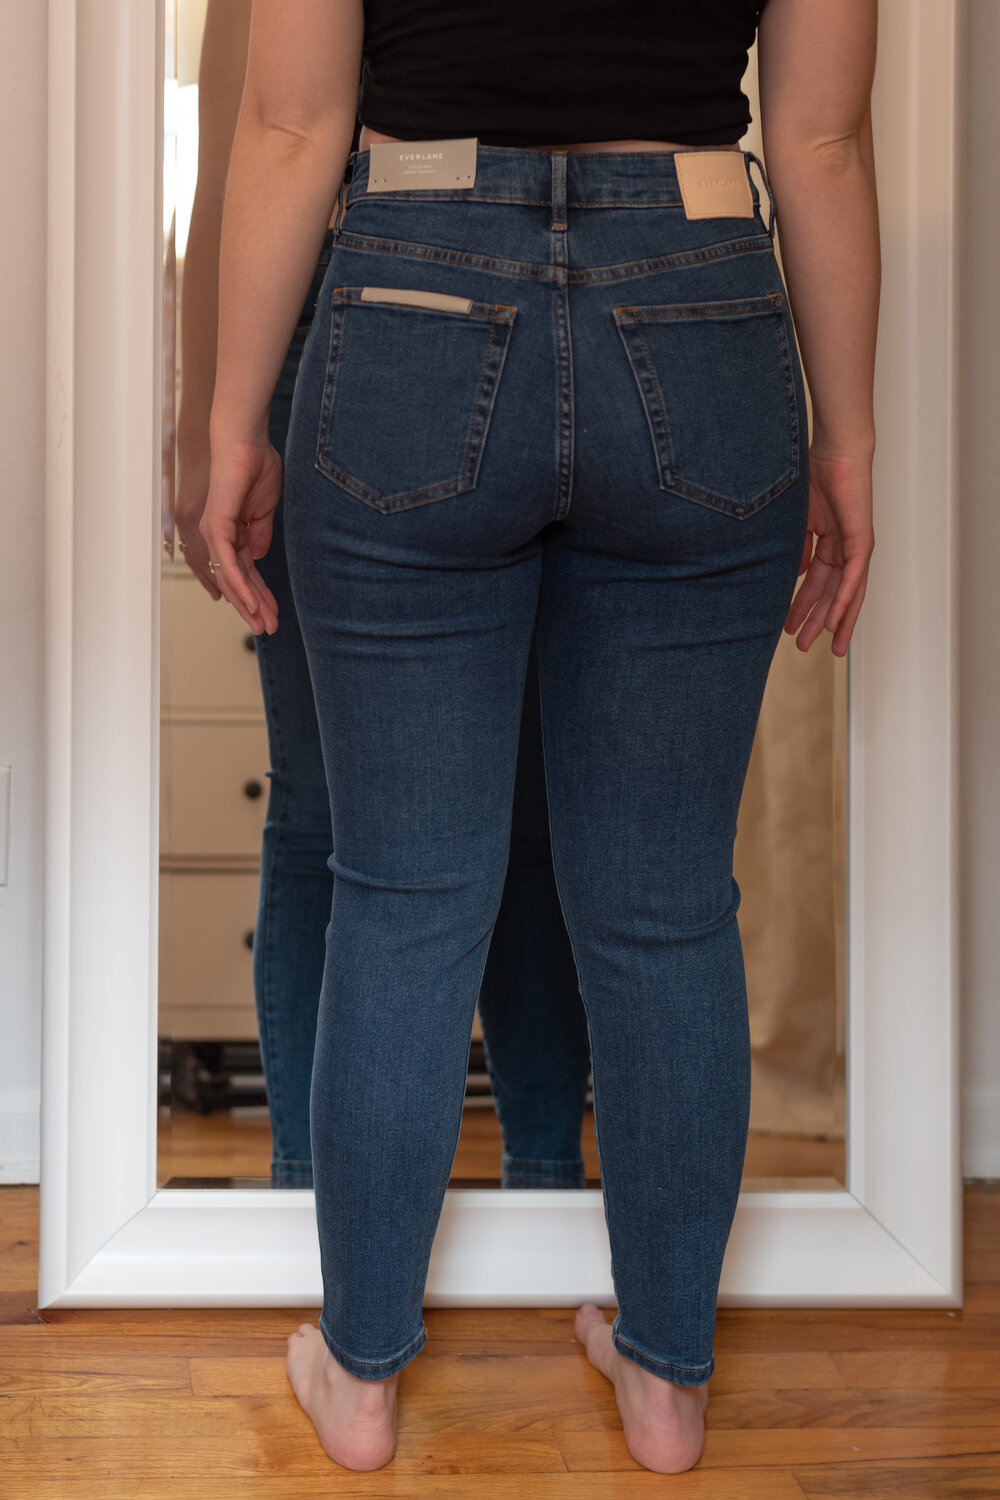 pust sprede handling EVERLANE AUTHENTIC STRETCH CURVY FIT JEANS REVIEW — The Petite Pear Project